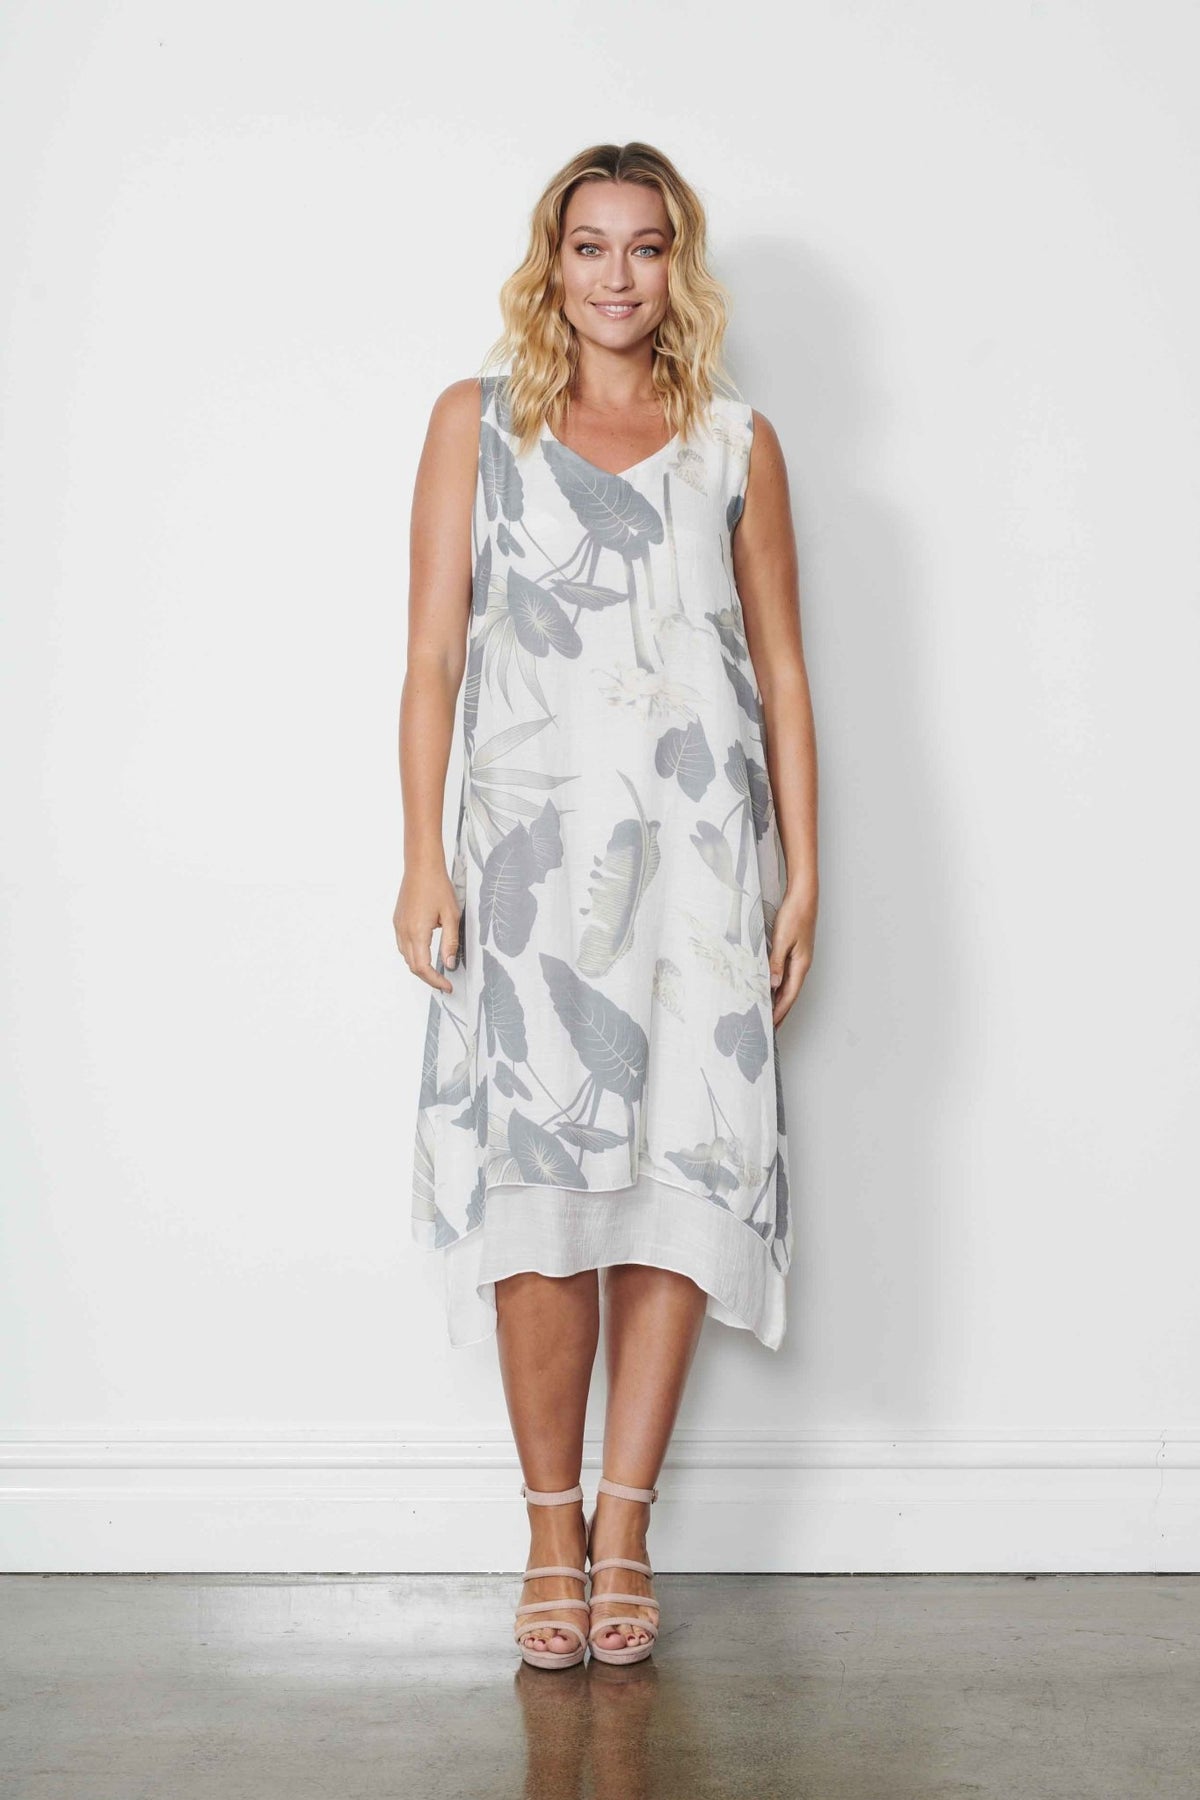 HOLMES AND FALLON_DRESS - 2 LAYER PRINTED _ _ Ebony Boutique NZ